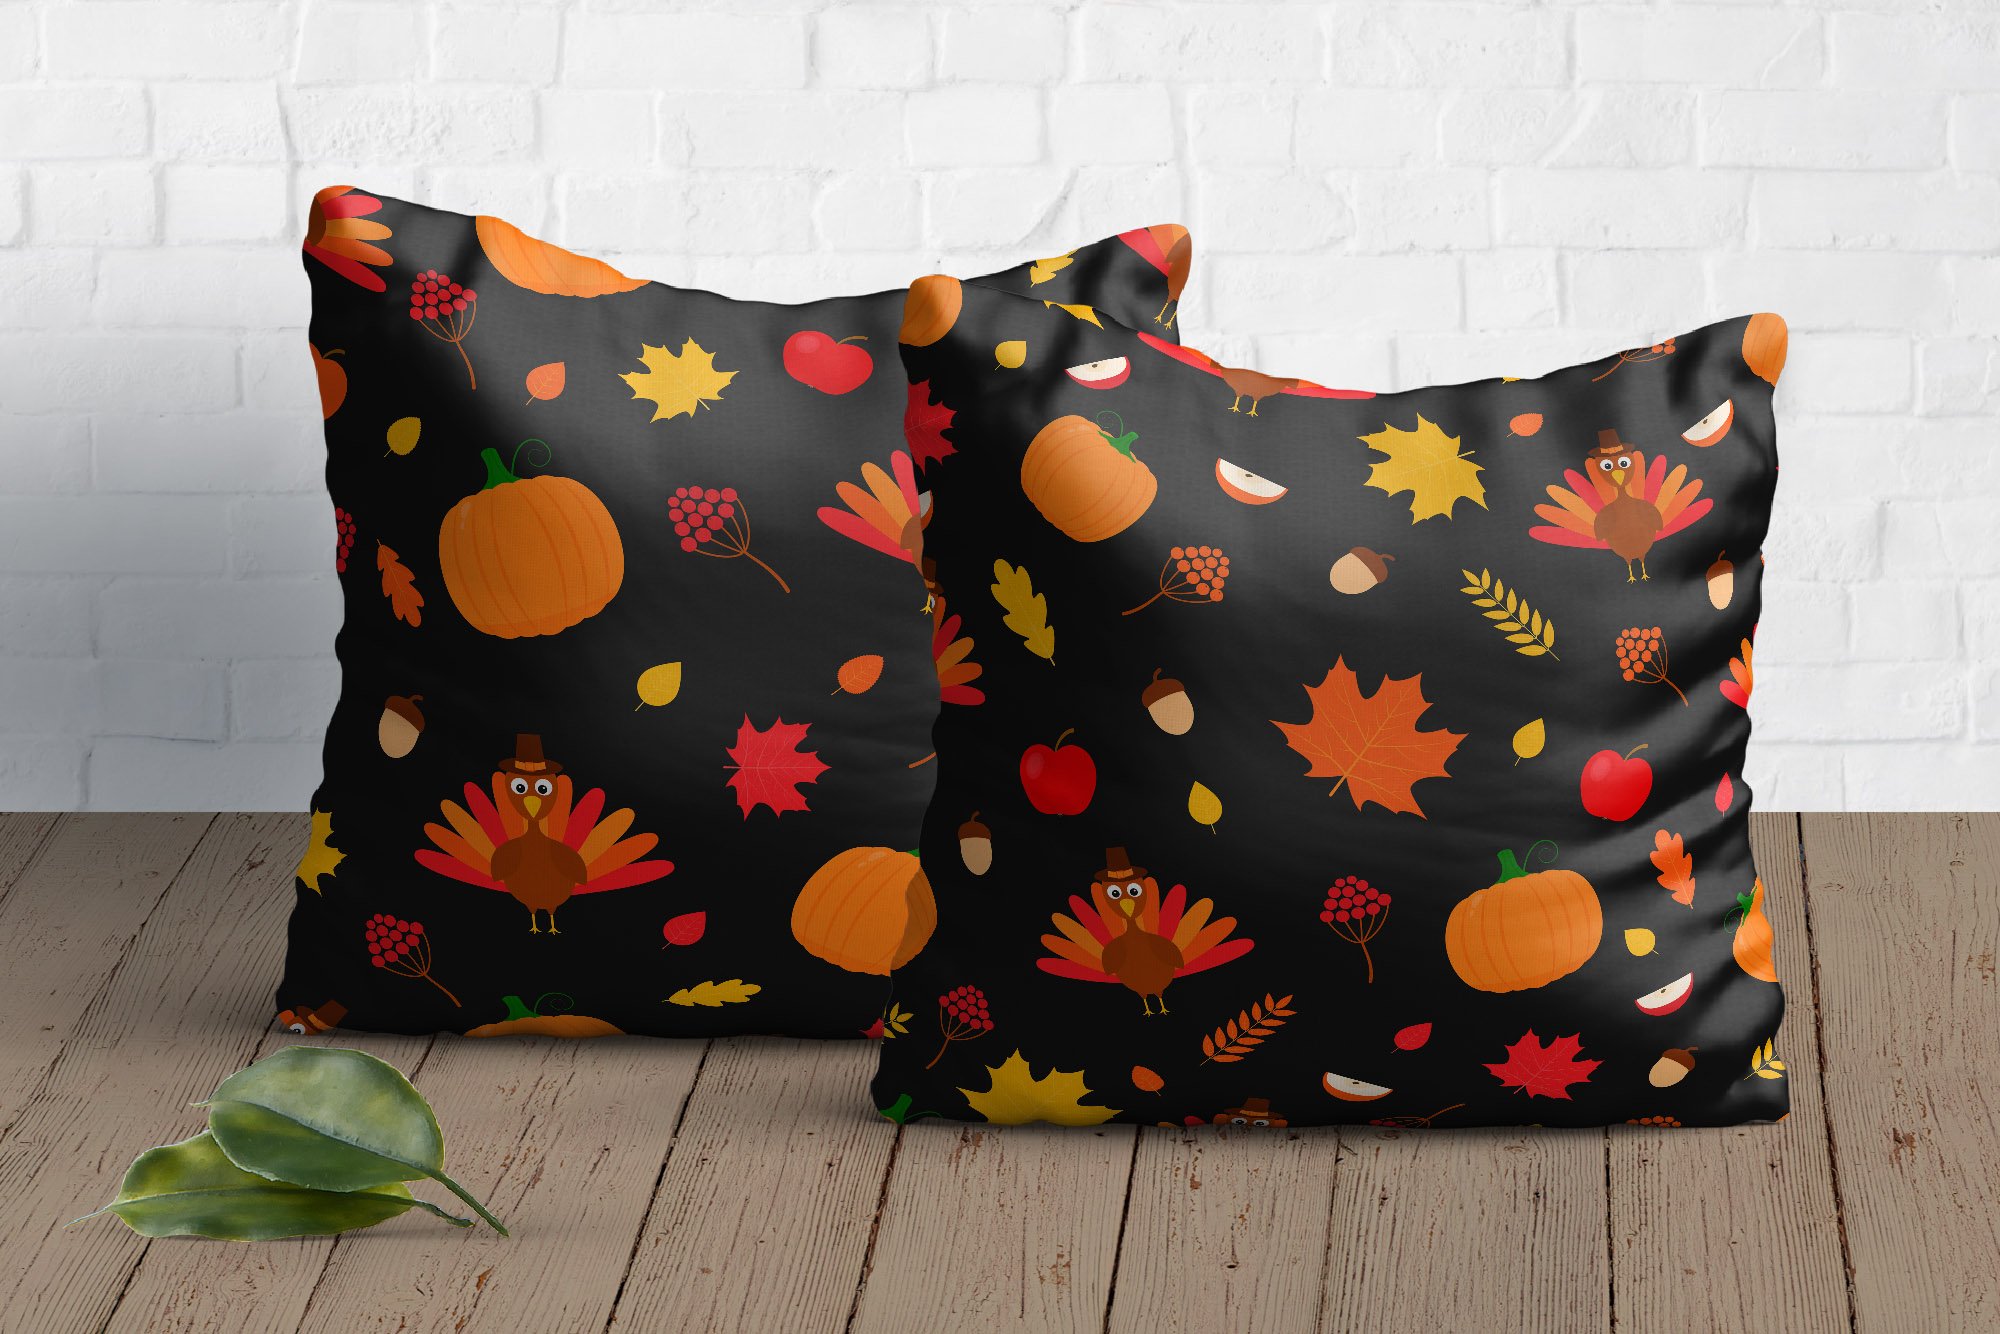 Two decorate dark pillow with Thanksgiving illustration.